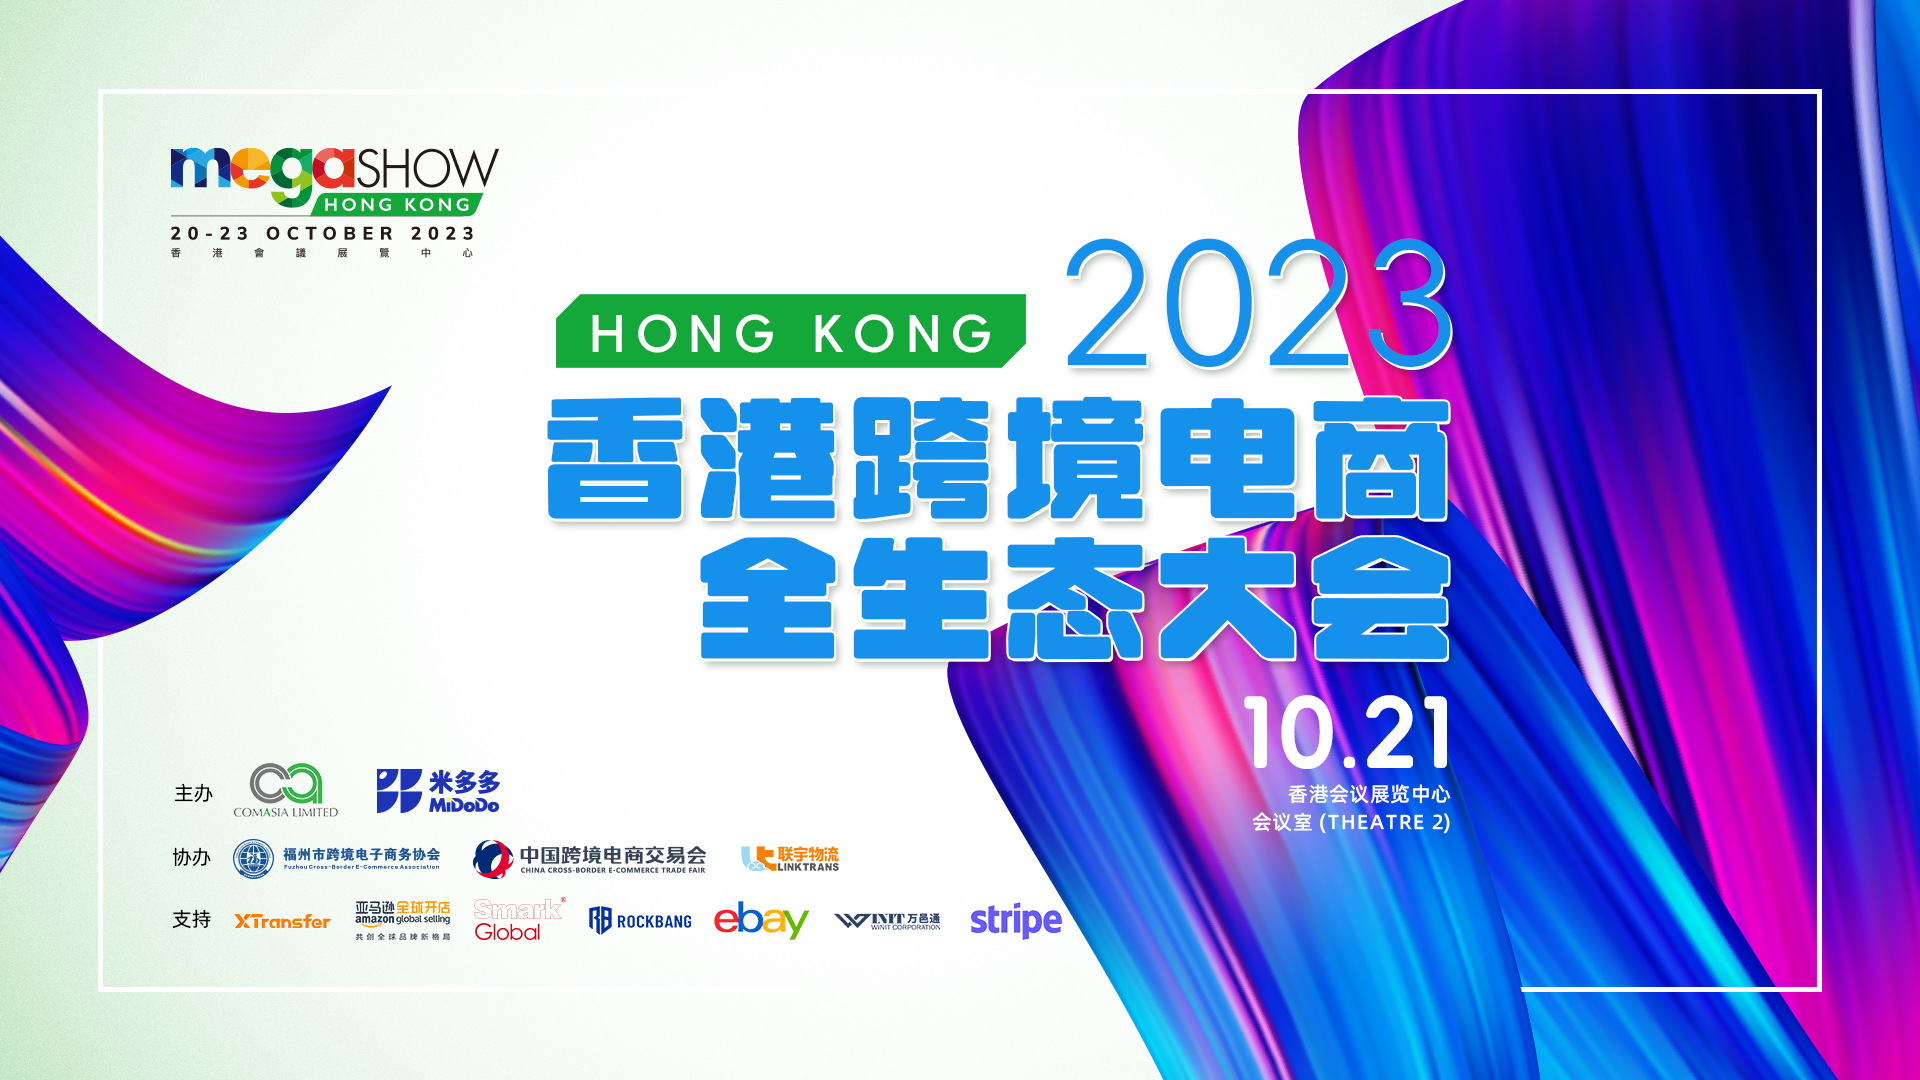 【Mega Show】Traffic guide for attending the conference is released to help you get to Hong Kong smoothly